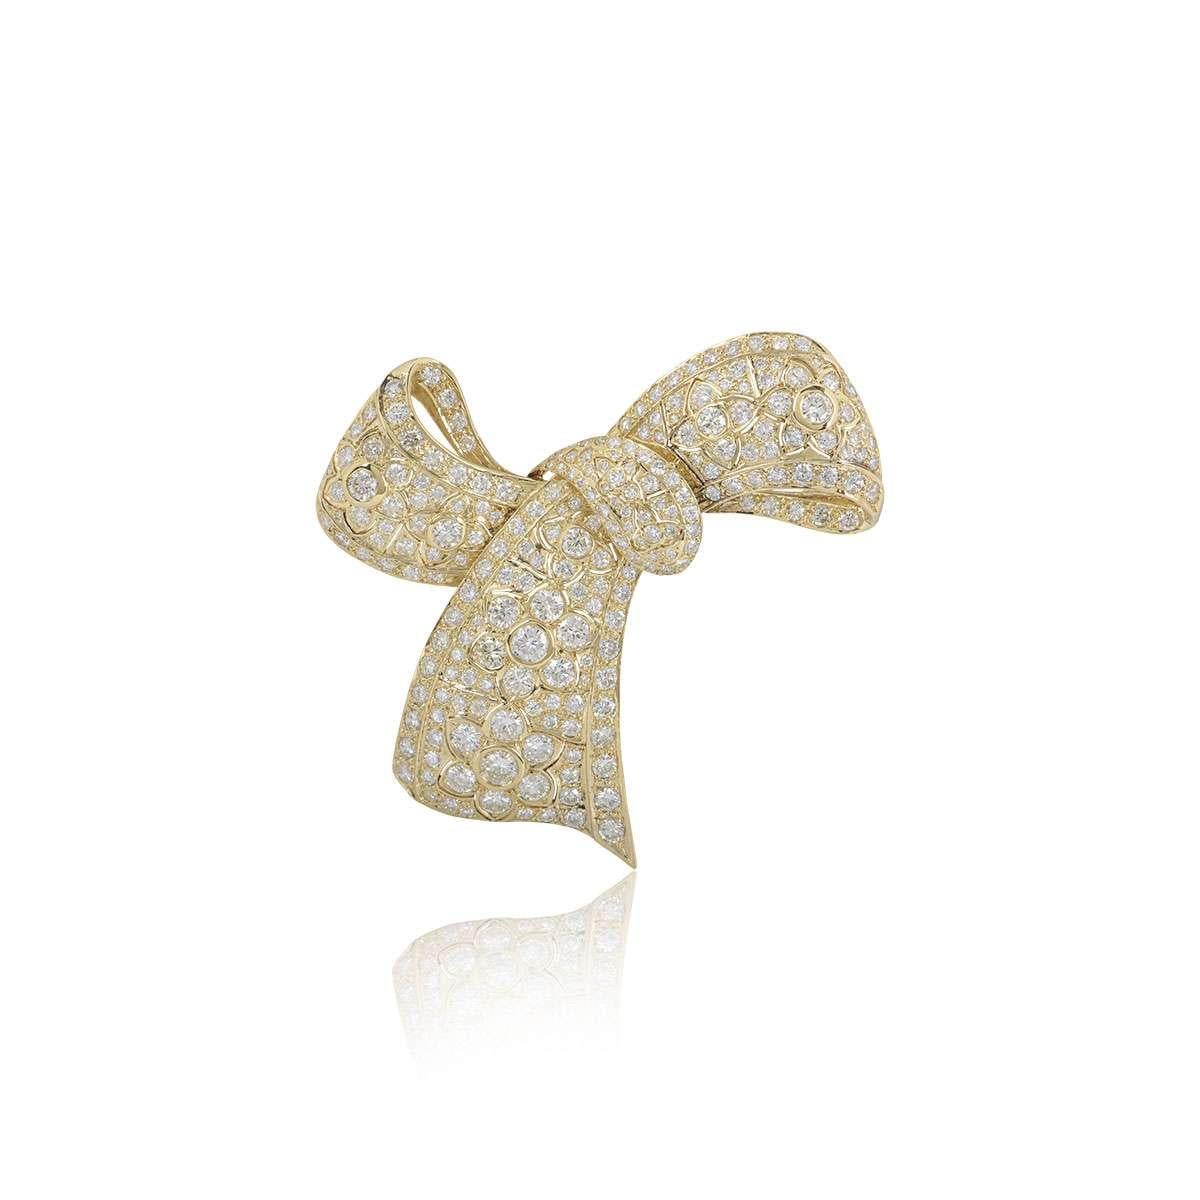 A stunning 18k yellow gold diamond Bow brooch. The brooch is set with round brilliant cut diamonds varying in size, totalling approximately 10.29ct. The brooch measures 6.5cm in width and 7cm in length and has a pin closure to the reverse. The